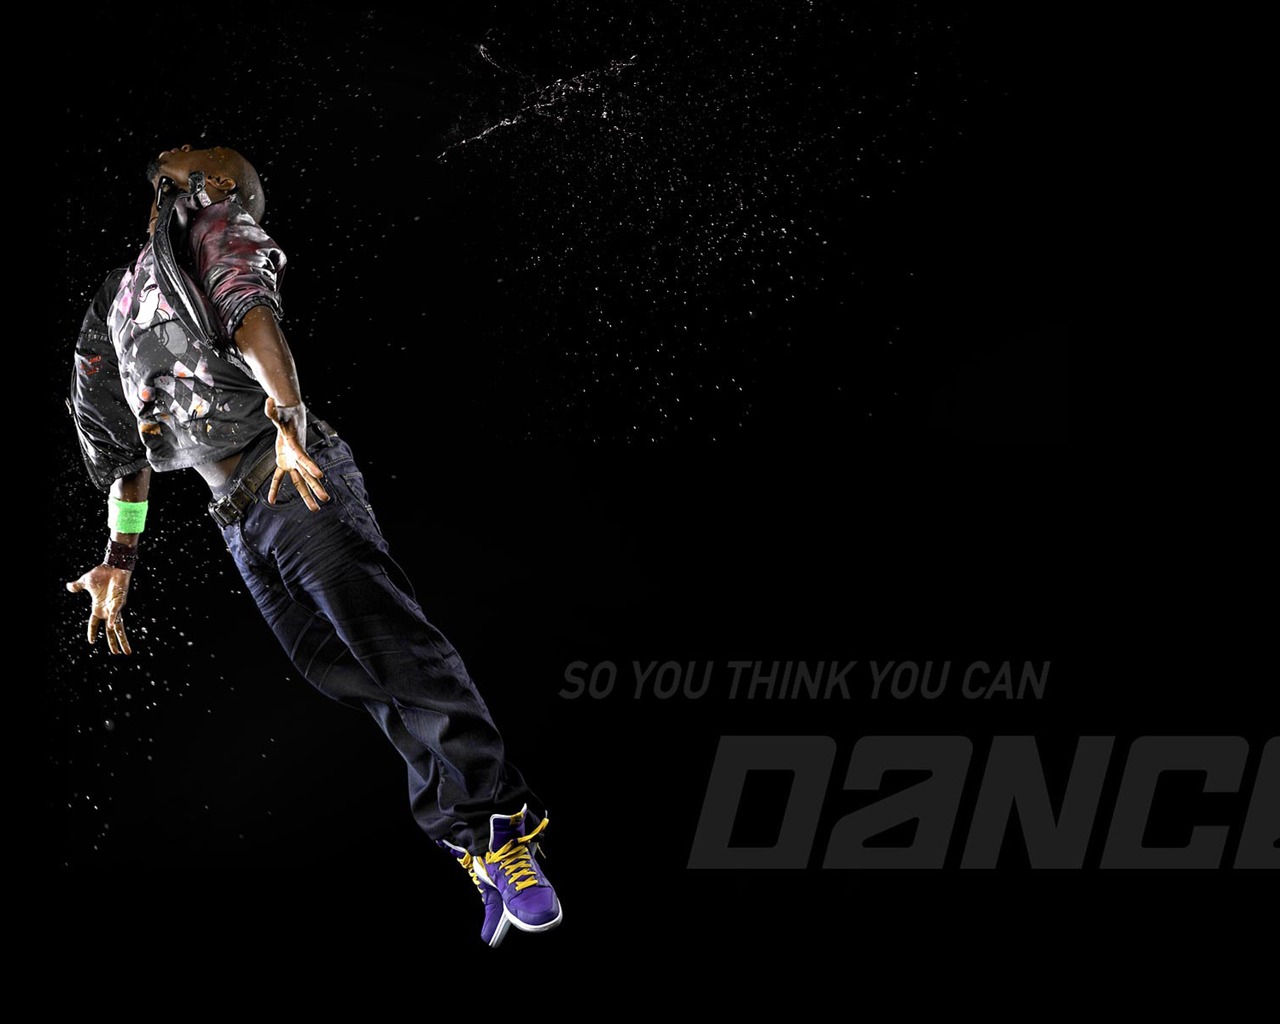 So You Think You Can Dance 舞林爭霸壁紙(一) #10 - 1280x1024